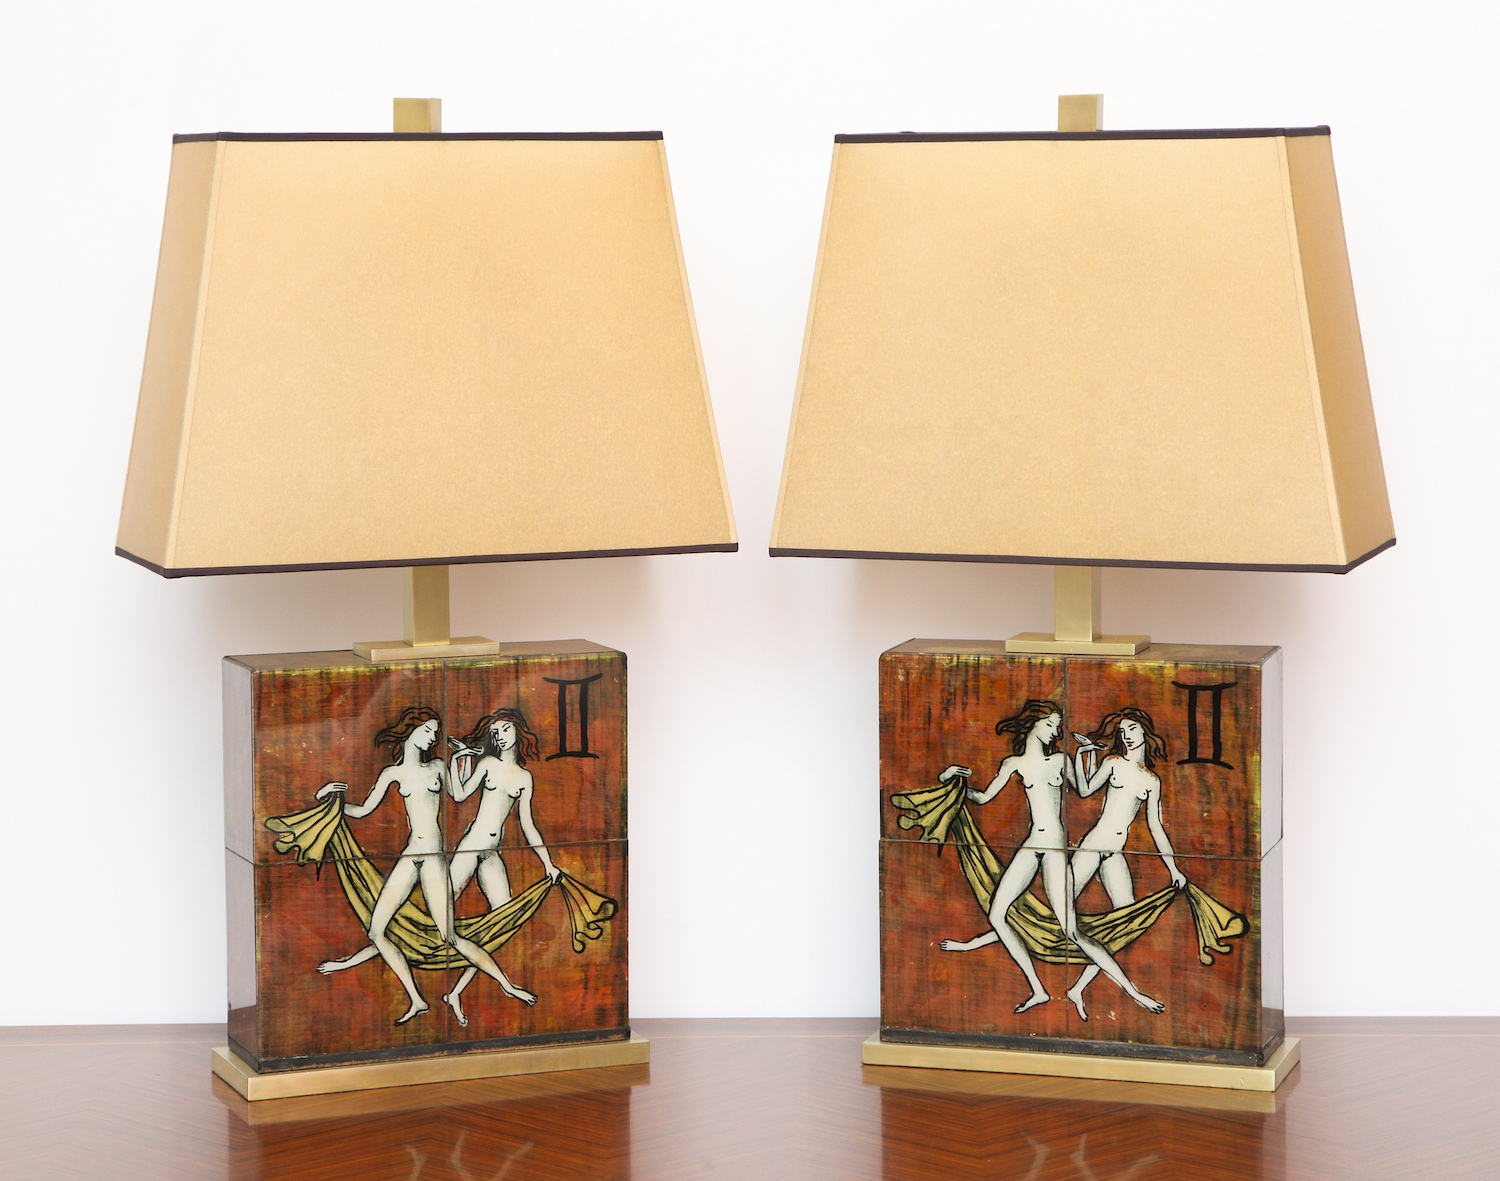 Unique Pair Of Table Lamps By Paul Laszlo And Karin Van Leyden Donzella